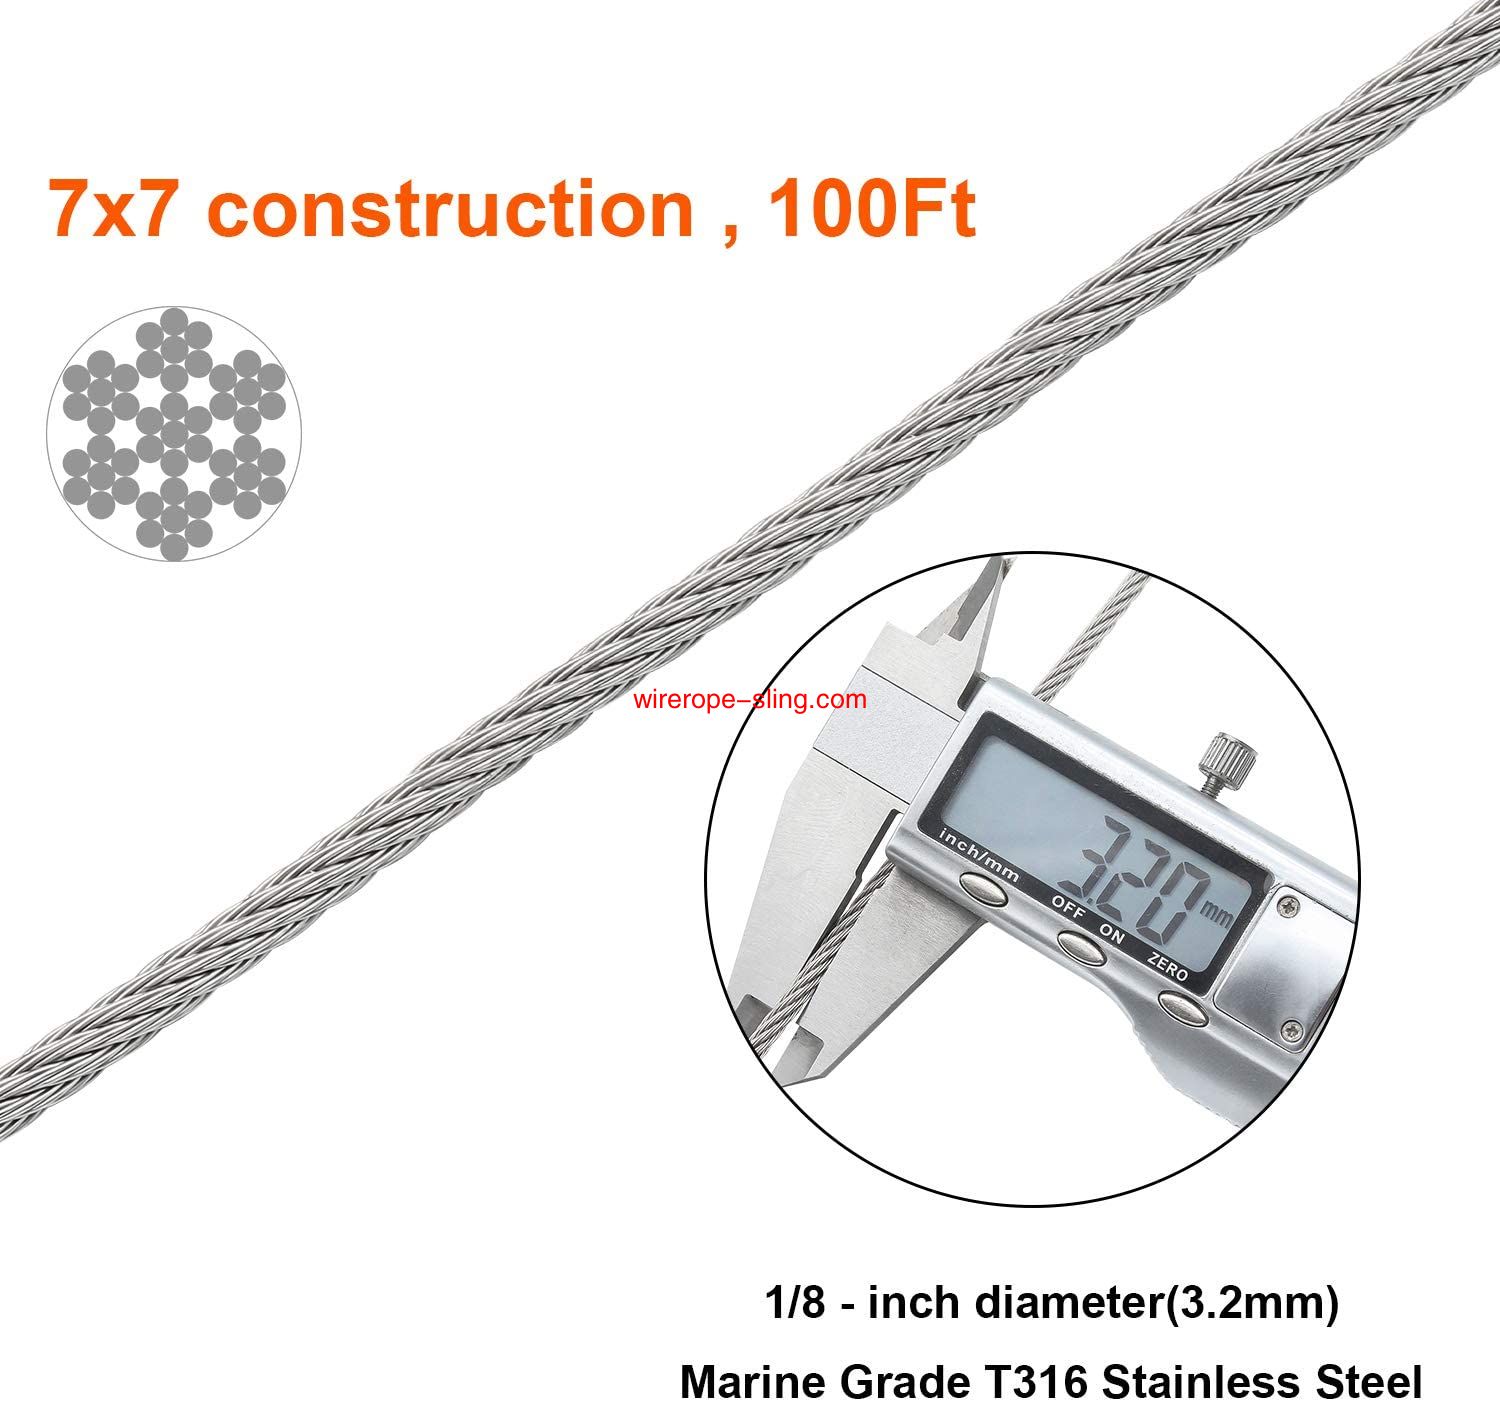 T316 Marine class 3 mm Stainless Steel Aircraft Wire rope Cable for Rails, decks, DIY Rails, 100 feet